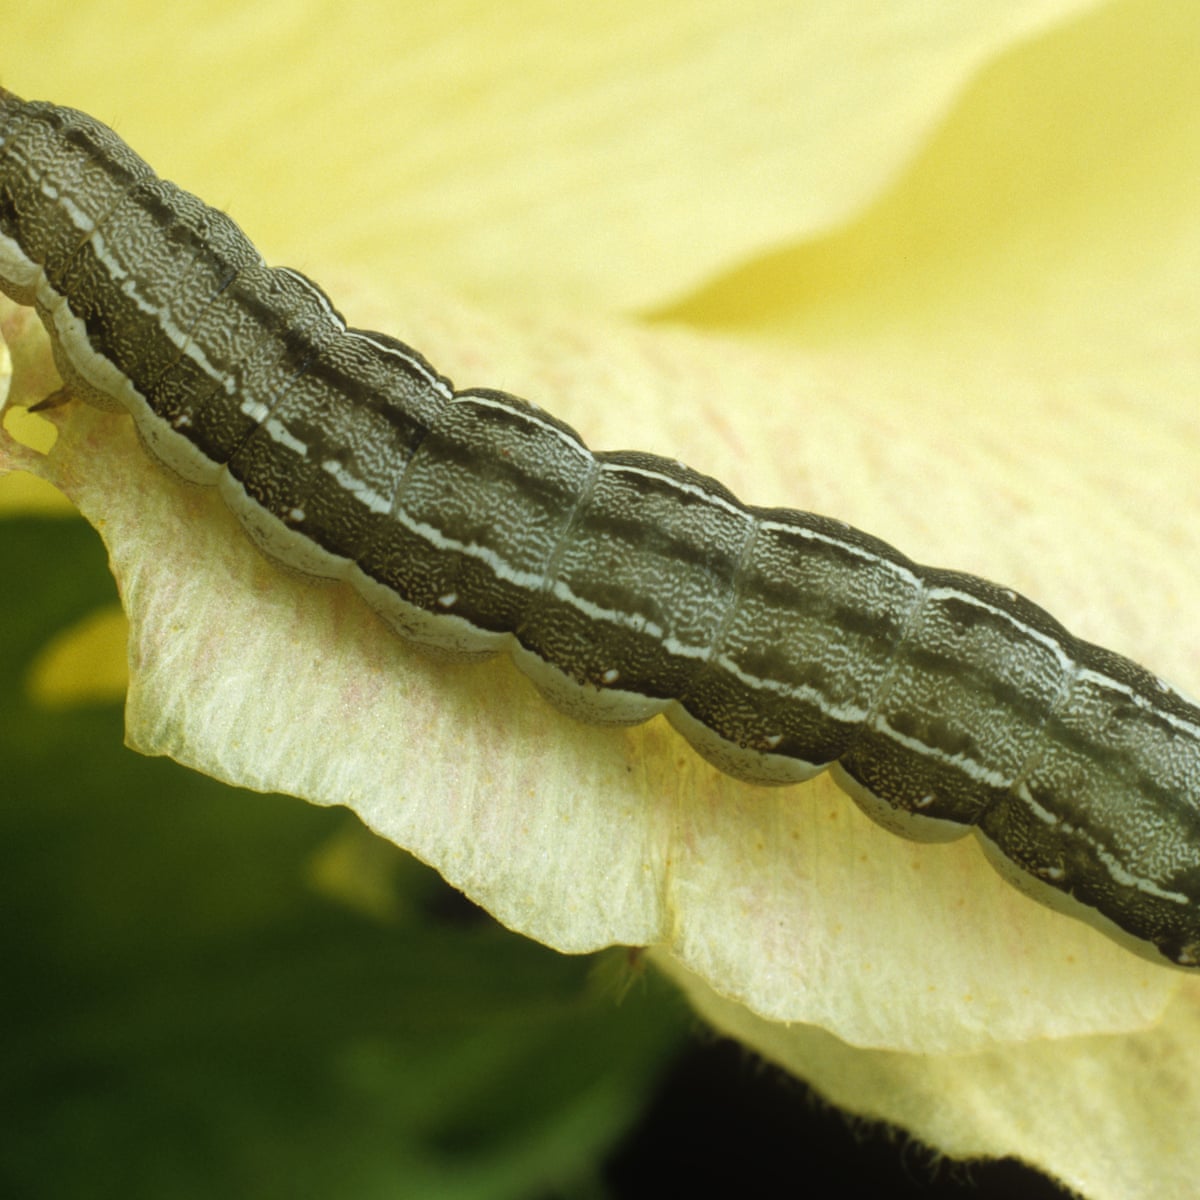 When very hungry caterpillars turn into cannibals | Insects | The ...